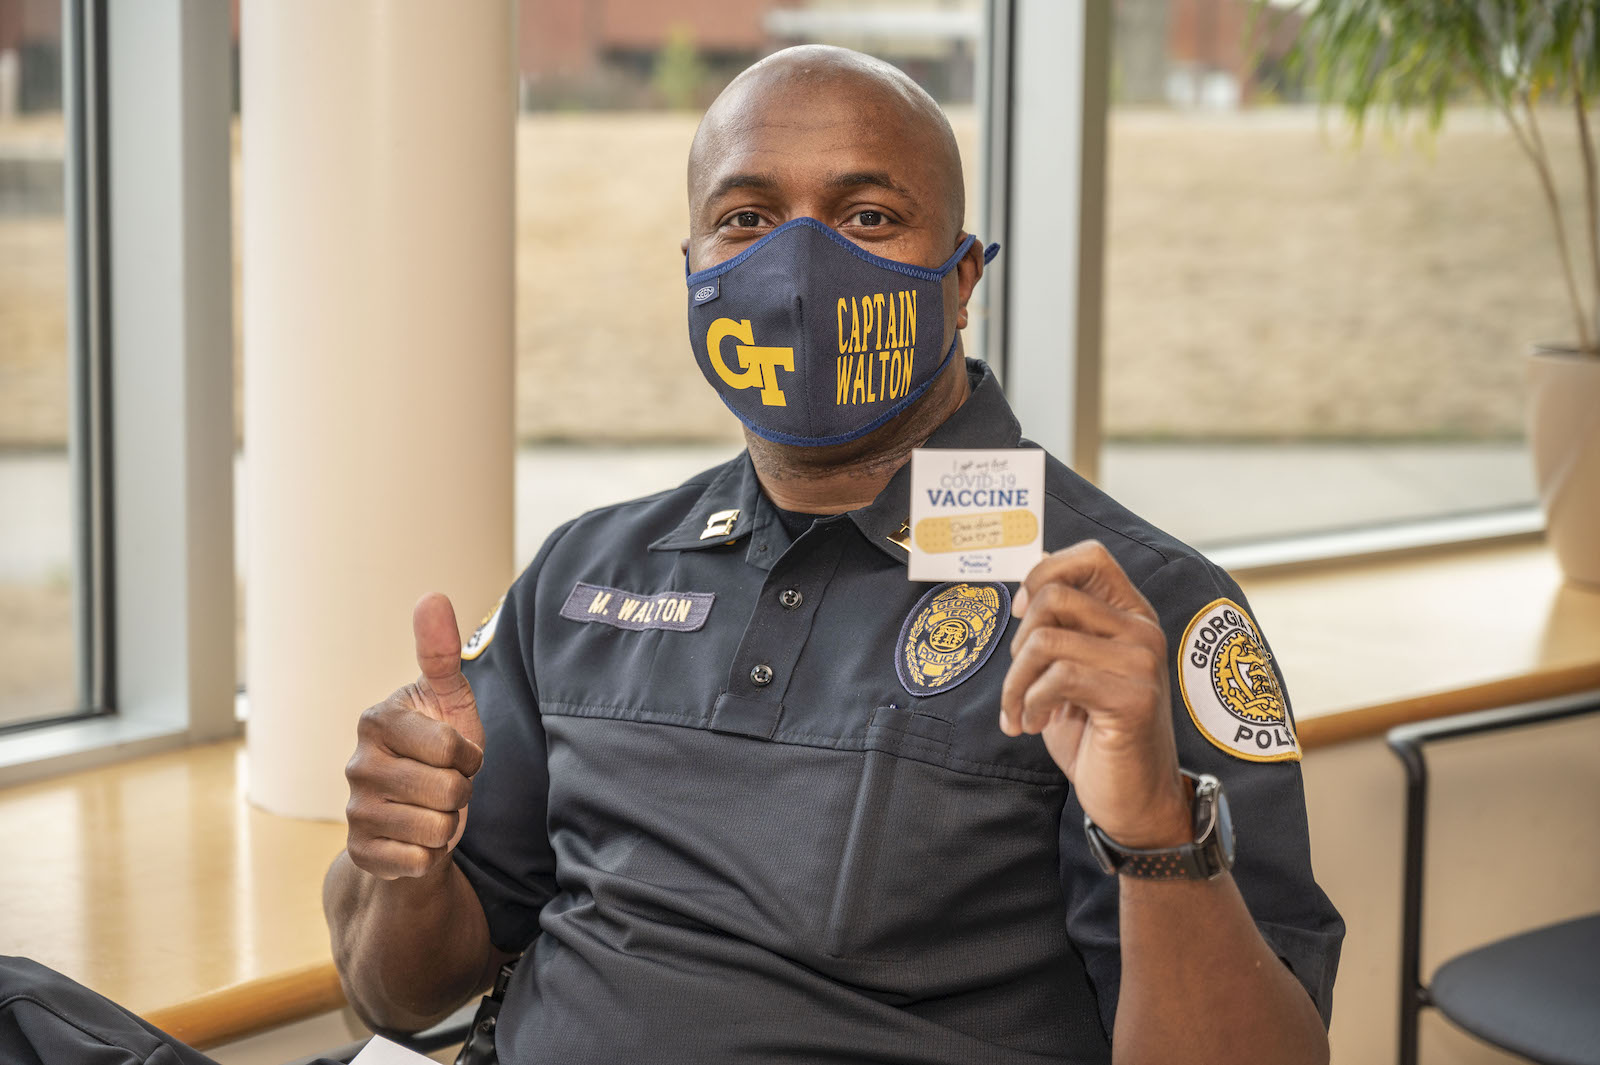 GTPD's Captain Marcus Walton said getting the Covid-19 vaccine gives him the sense of being "one step closer to getting back to some type of normalcy in the world." (Photo by Christopher Moore)